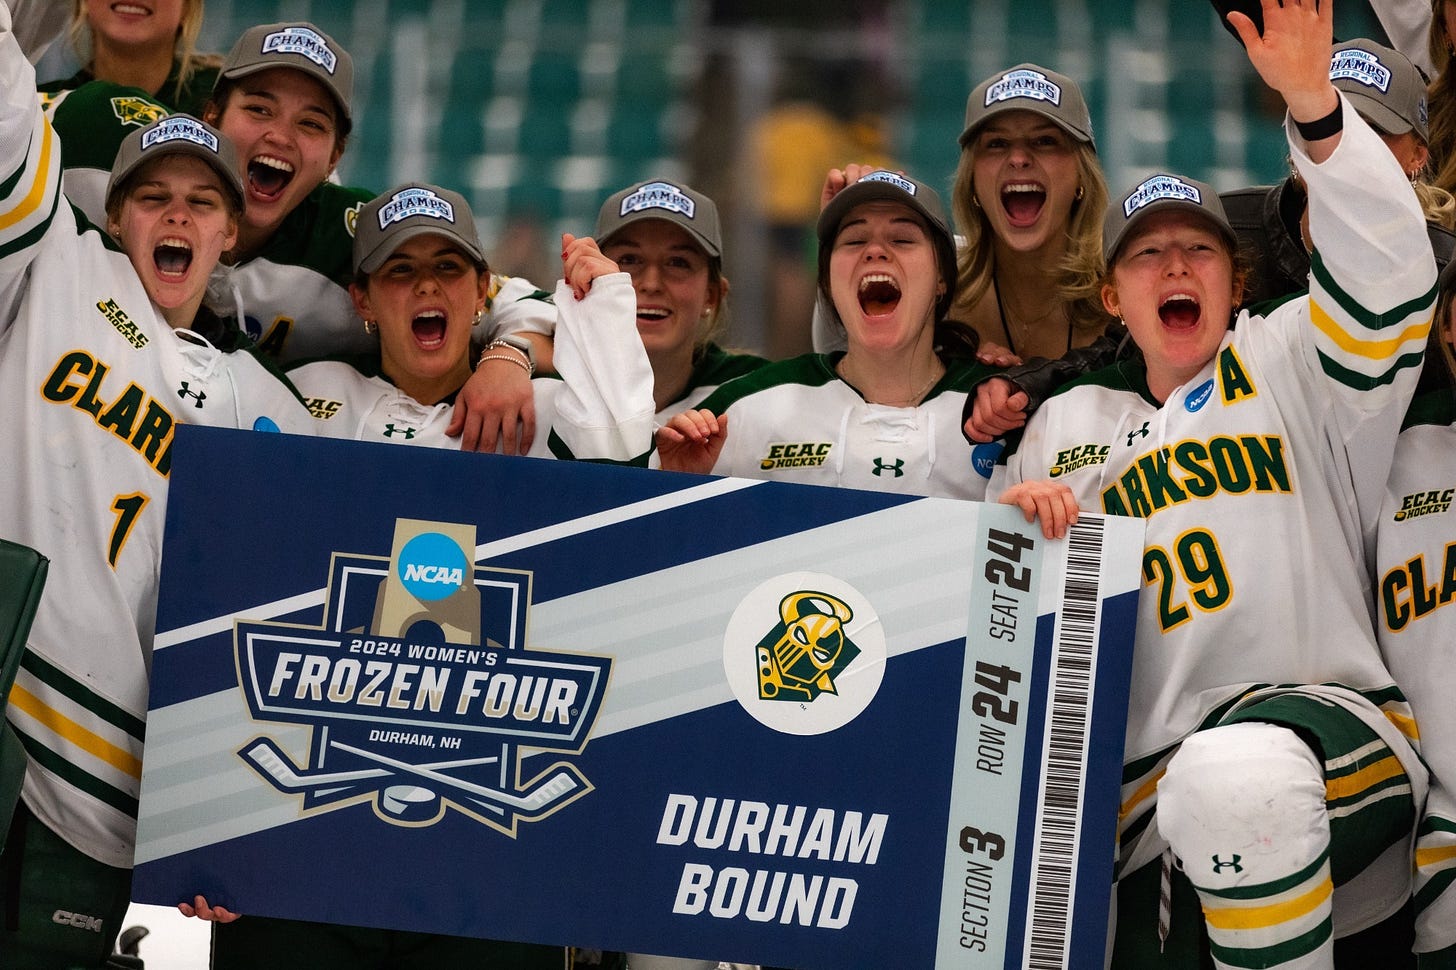 Clarkson women's ice hockey players celebrating after defeating Minnesota, posing with a giant ticket for the Frozen Four.